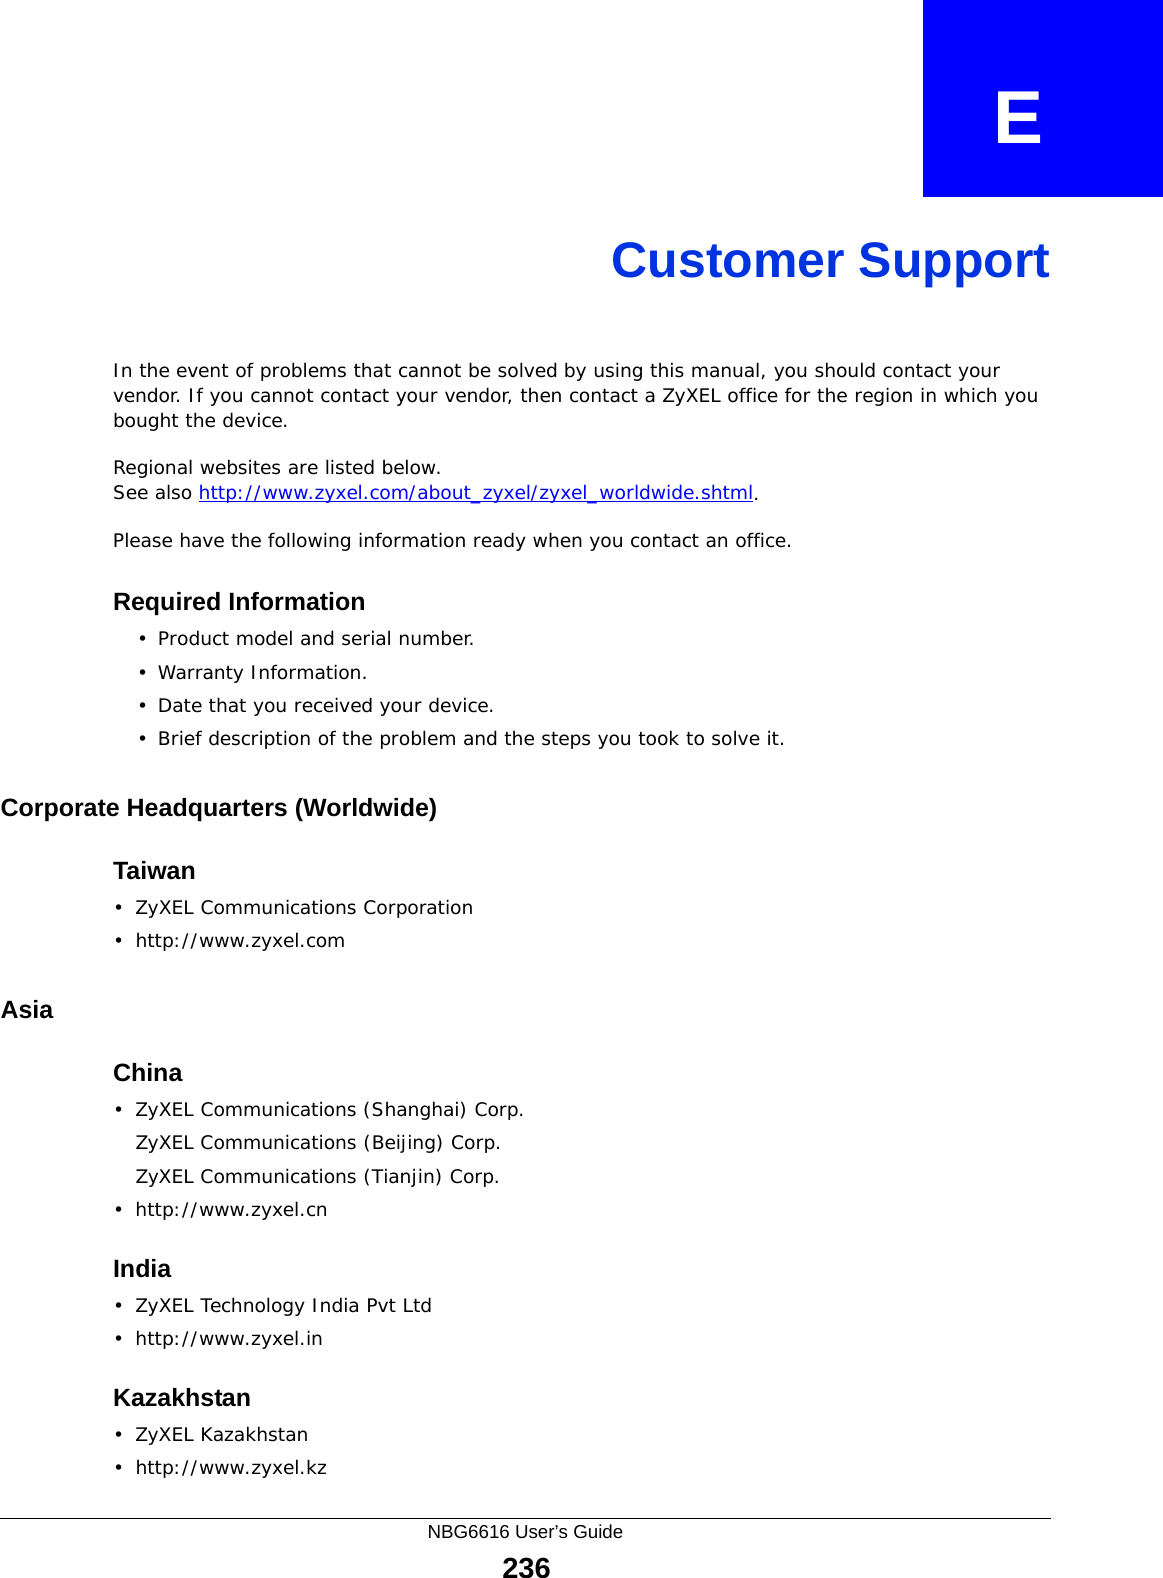 NBG6616 User’s Guide236APPENDIX   ECustomer SupportIn the event of problems that cannot be solved by using this manual, you should contact your vendor. If you cannot contact your vendor, then contact a ZyXEL office for the region in which you bought the device. Regional websites are listed below. See also http://www.zyxel.com/about_zyxel/zyxel_worldwide.shtml. Please have the following information ready when you contact an office.Required Information• Product model and serial number.• Warranty Information.• Date that you received your device.• Brief description of the problem and the steps you took to solve it.Corporate Headquarters (Worldwide)Taiwan• ZyXEL Communications Corporation• http://www.zyxel.comAsiaChina• ZyXEL Communications (Shanghai) Corp.ZyXEL Communications (Beijing) Corp.ZyXEL Communications (Tianjin) Corp.• http://www.zyxel.cnIndia• ZyXEL Technology India Pvt Ltd• http://www.zyxel.inKazakhstan•ZyXEL Kazakhstan• http://www.zyxel.kz